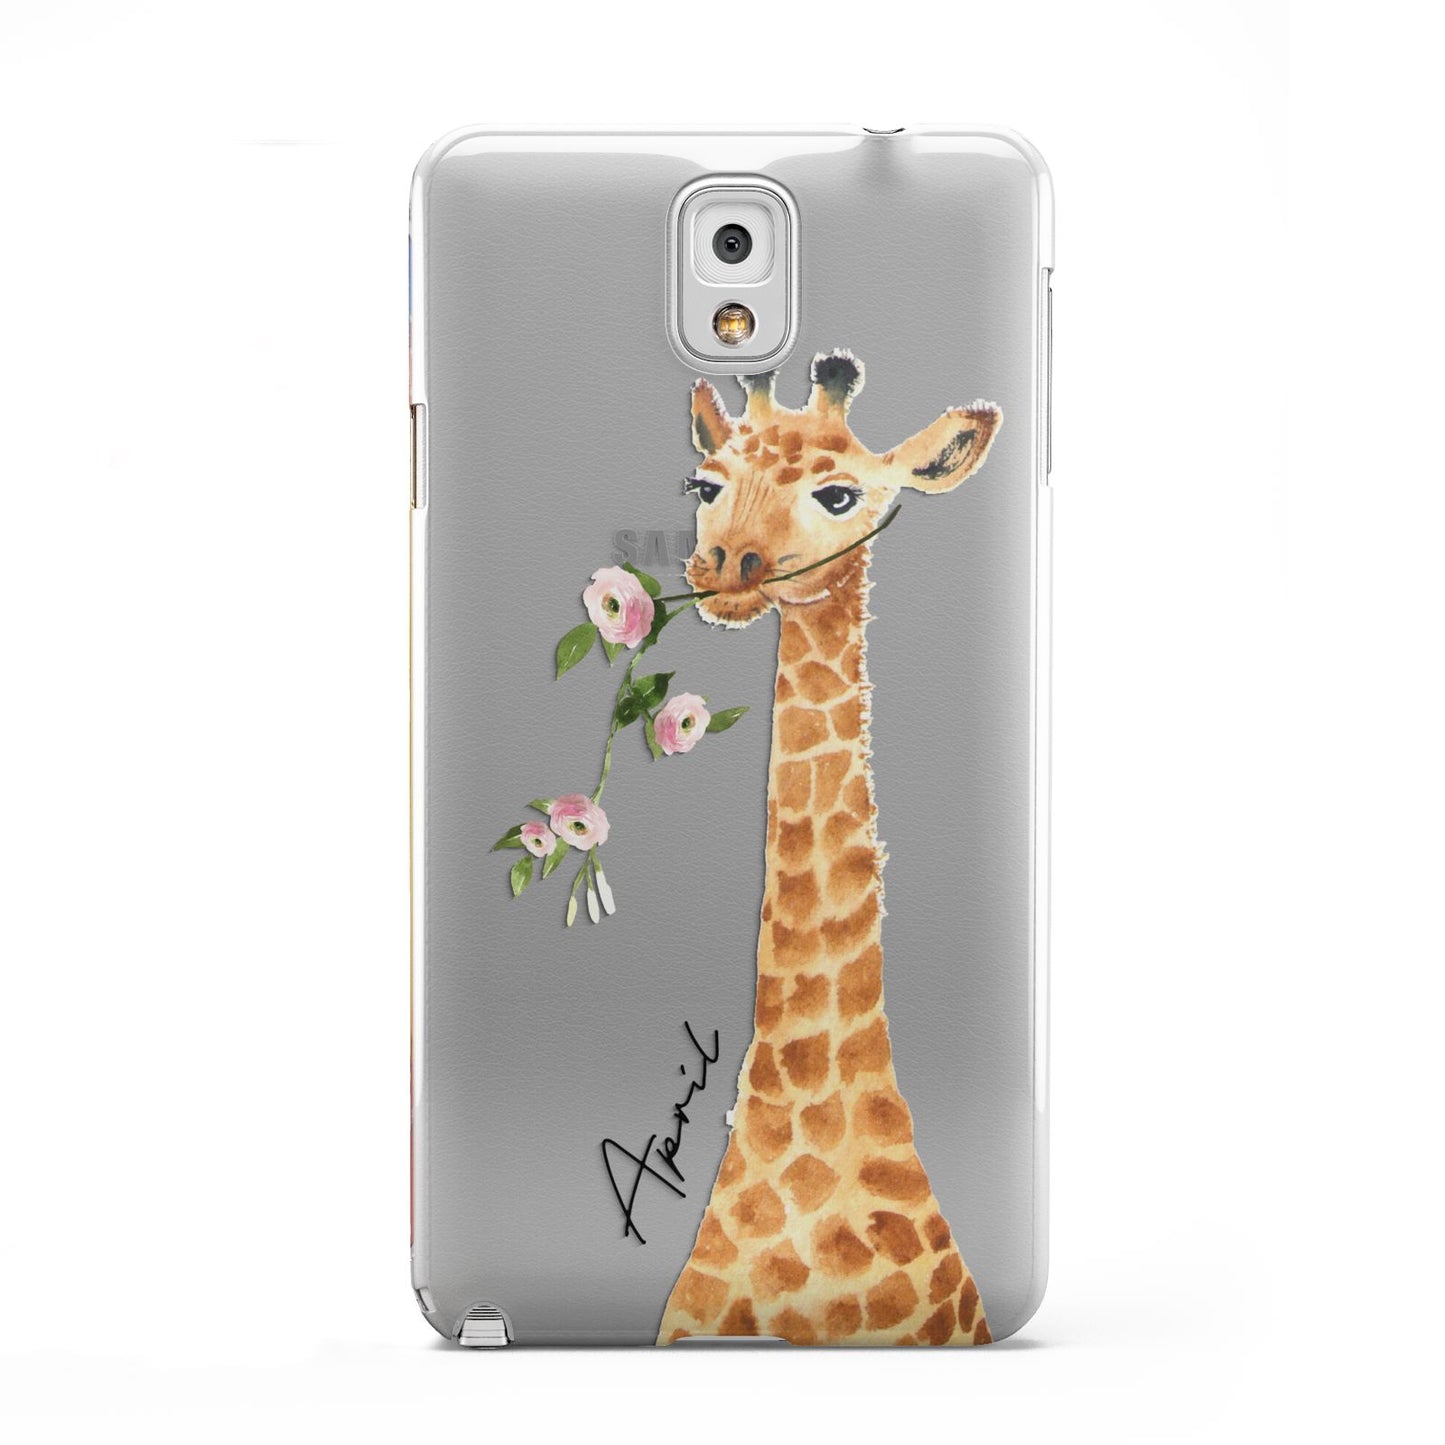 Personalised Giraffe with Name Samsung Galaxy Note 3 Case